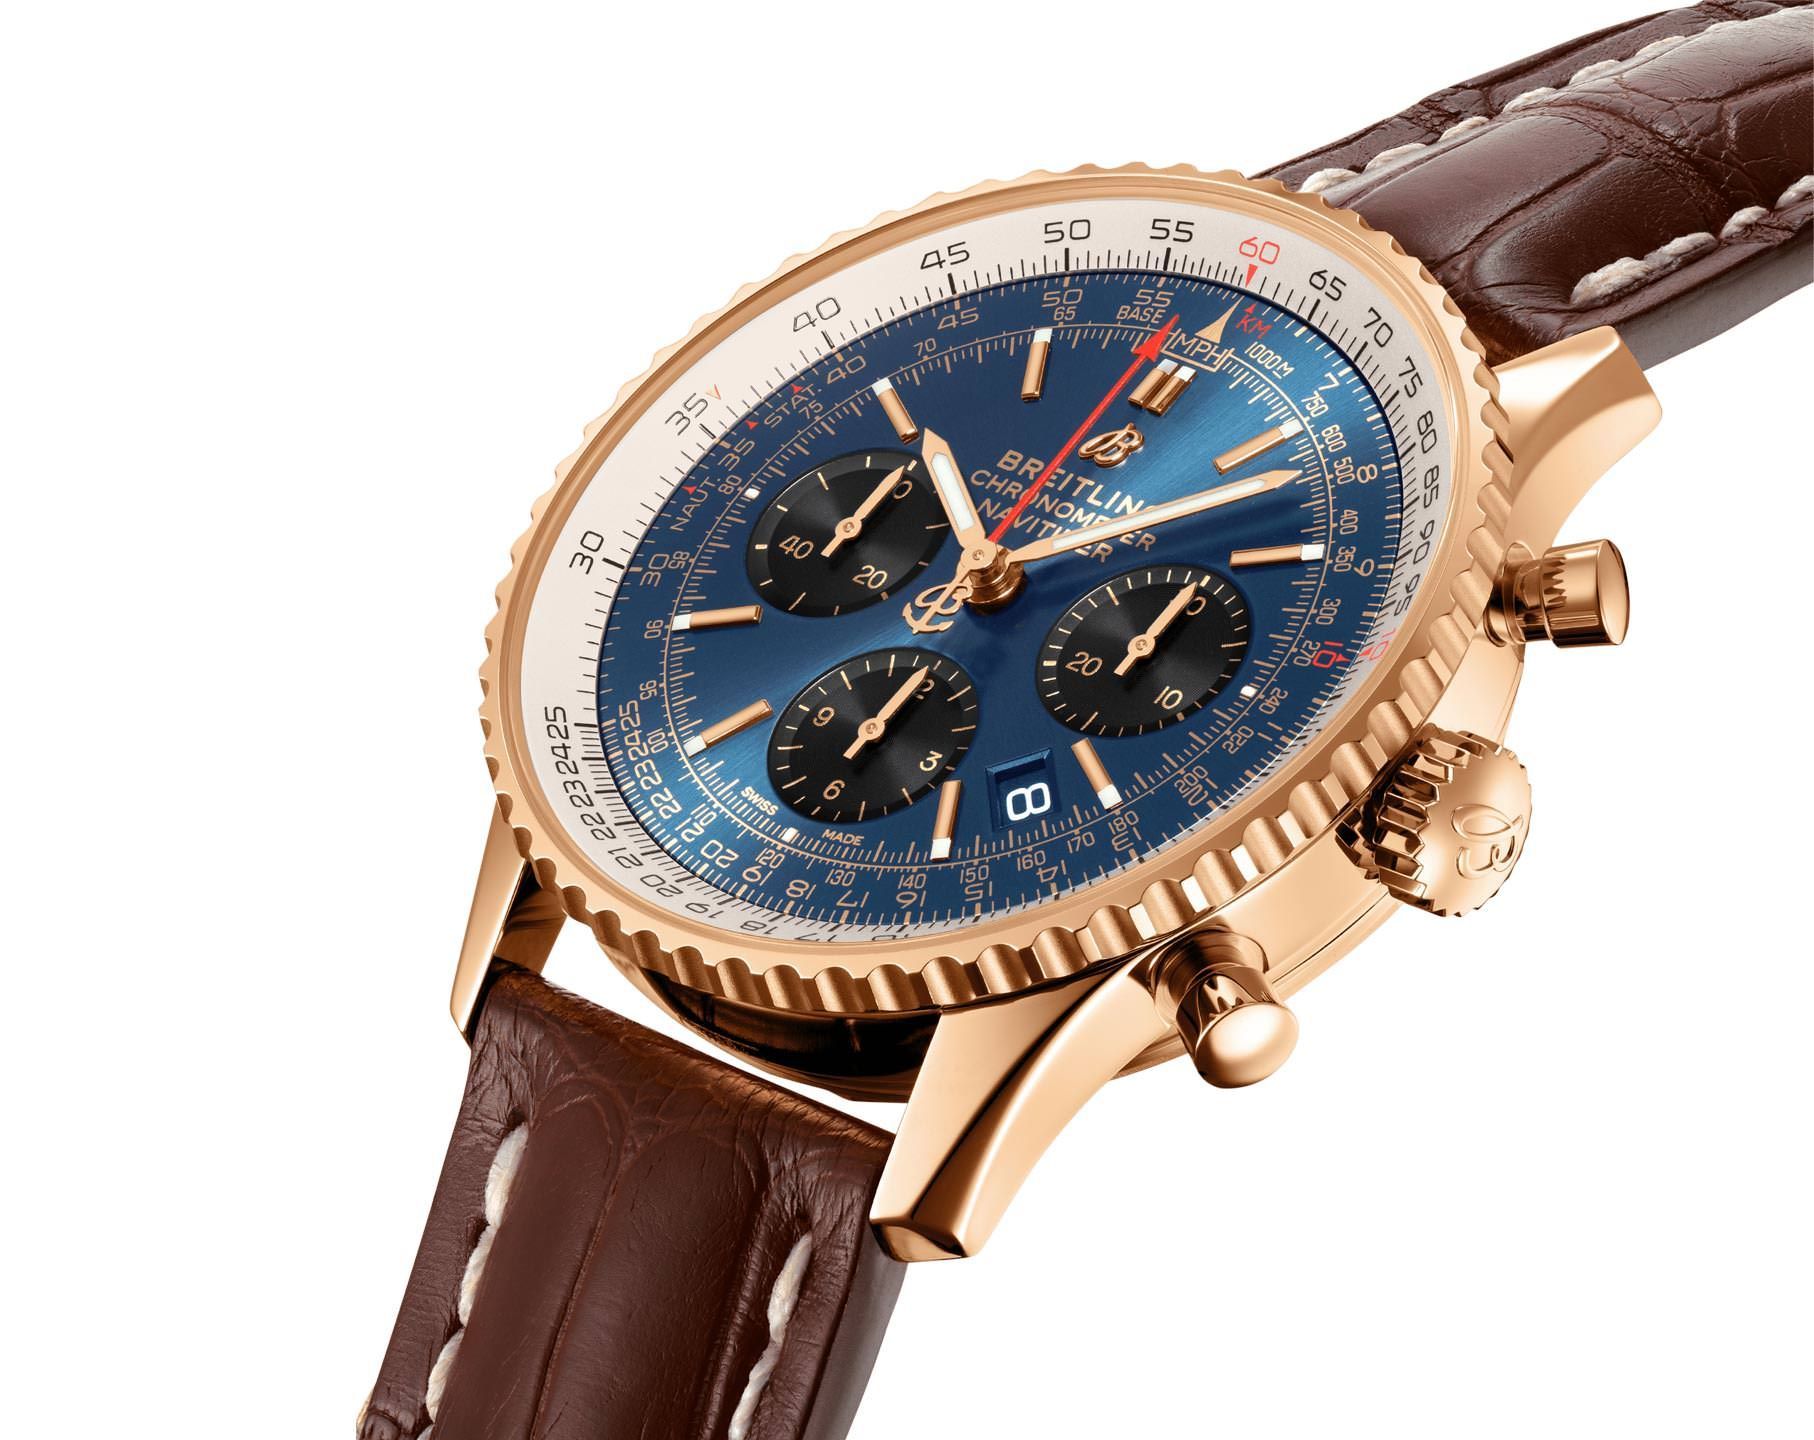 Breitling  43 mm Watch in Blue Dial For Men - 2